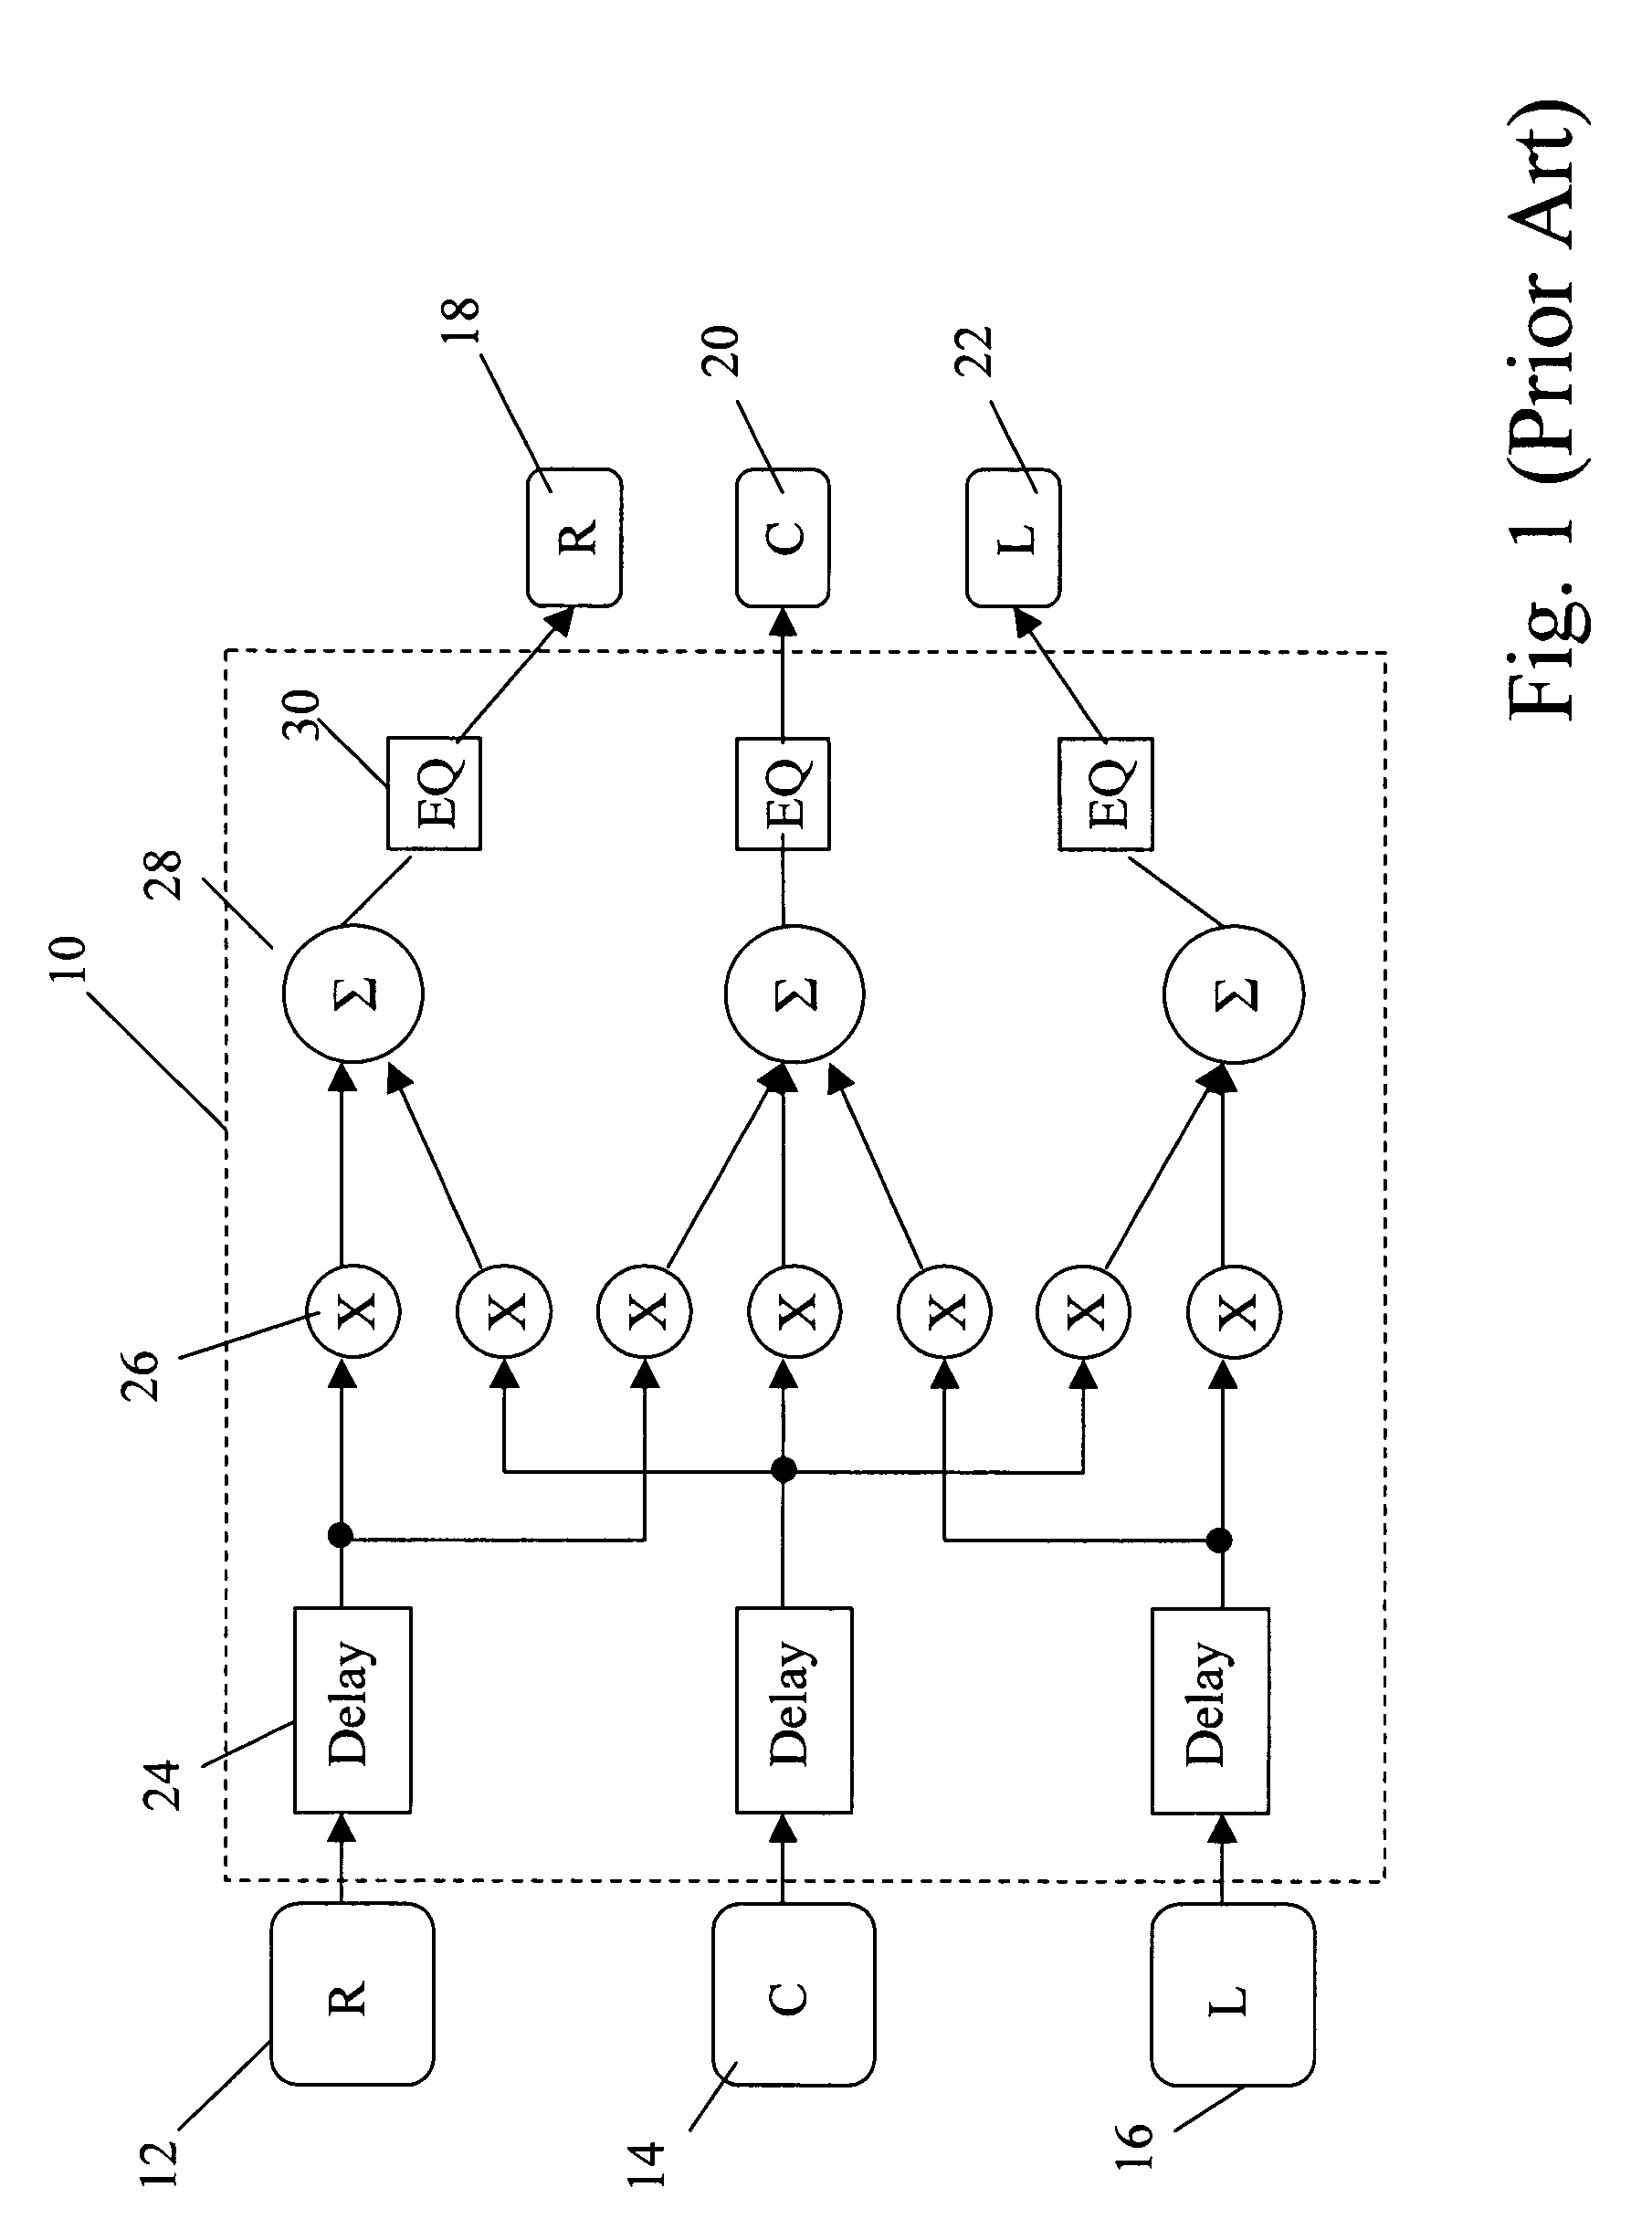 Method of mixing audio channels using correlated outputs